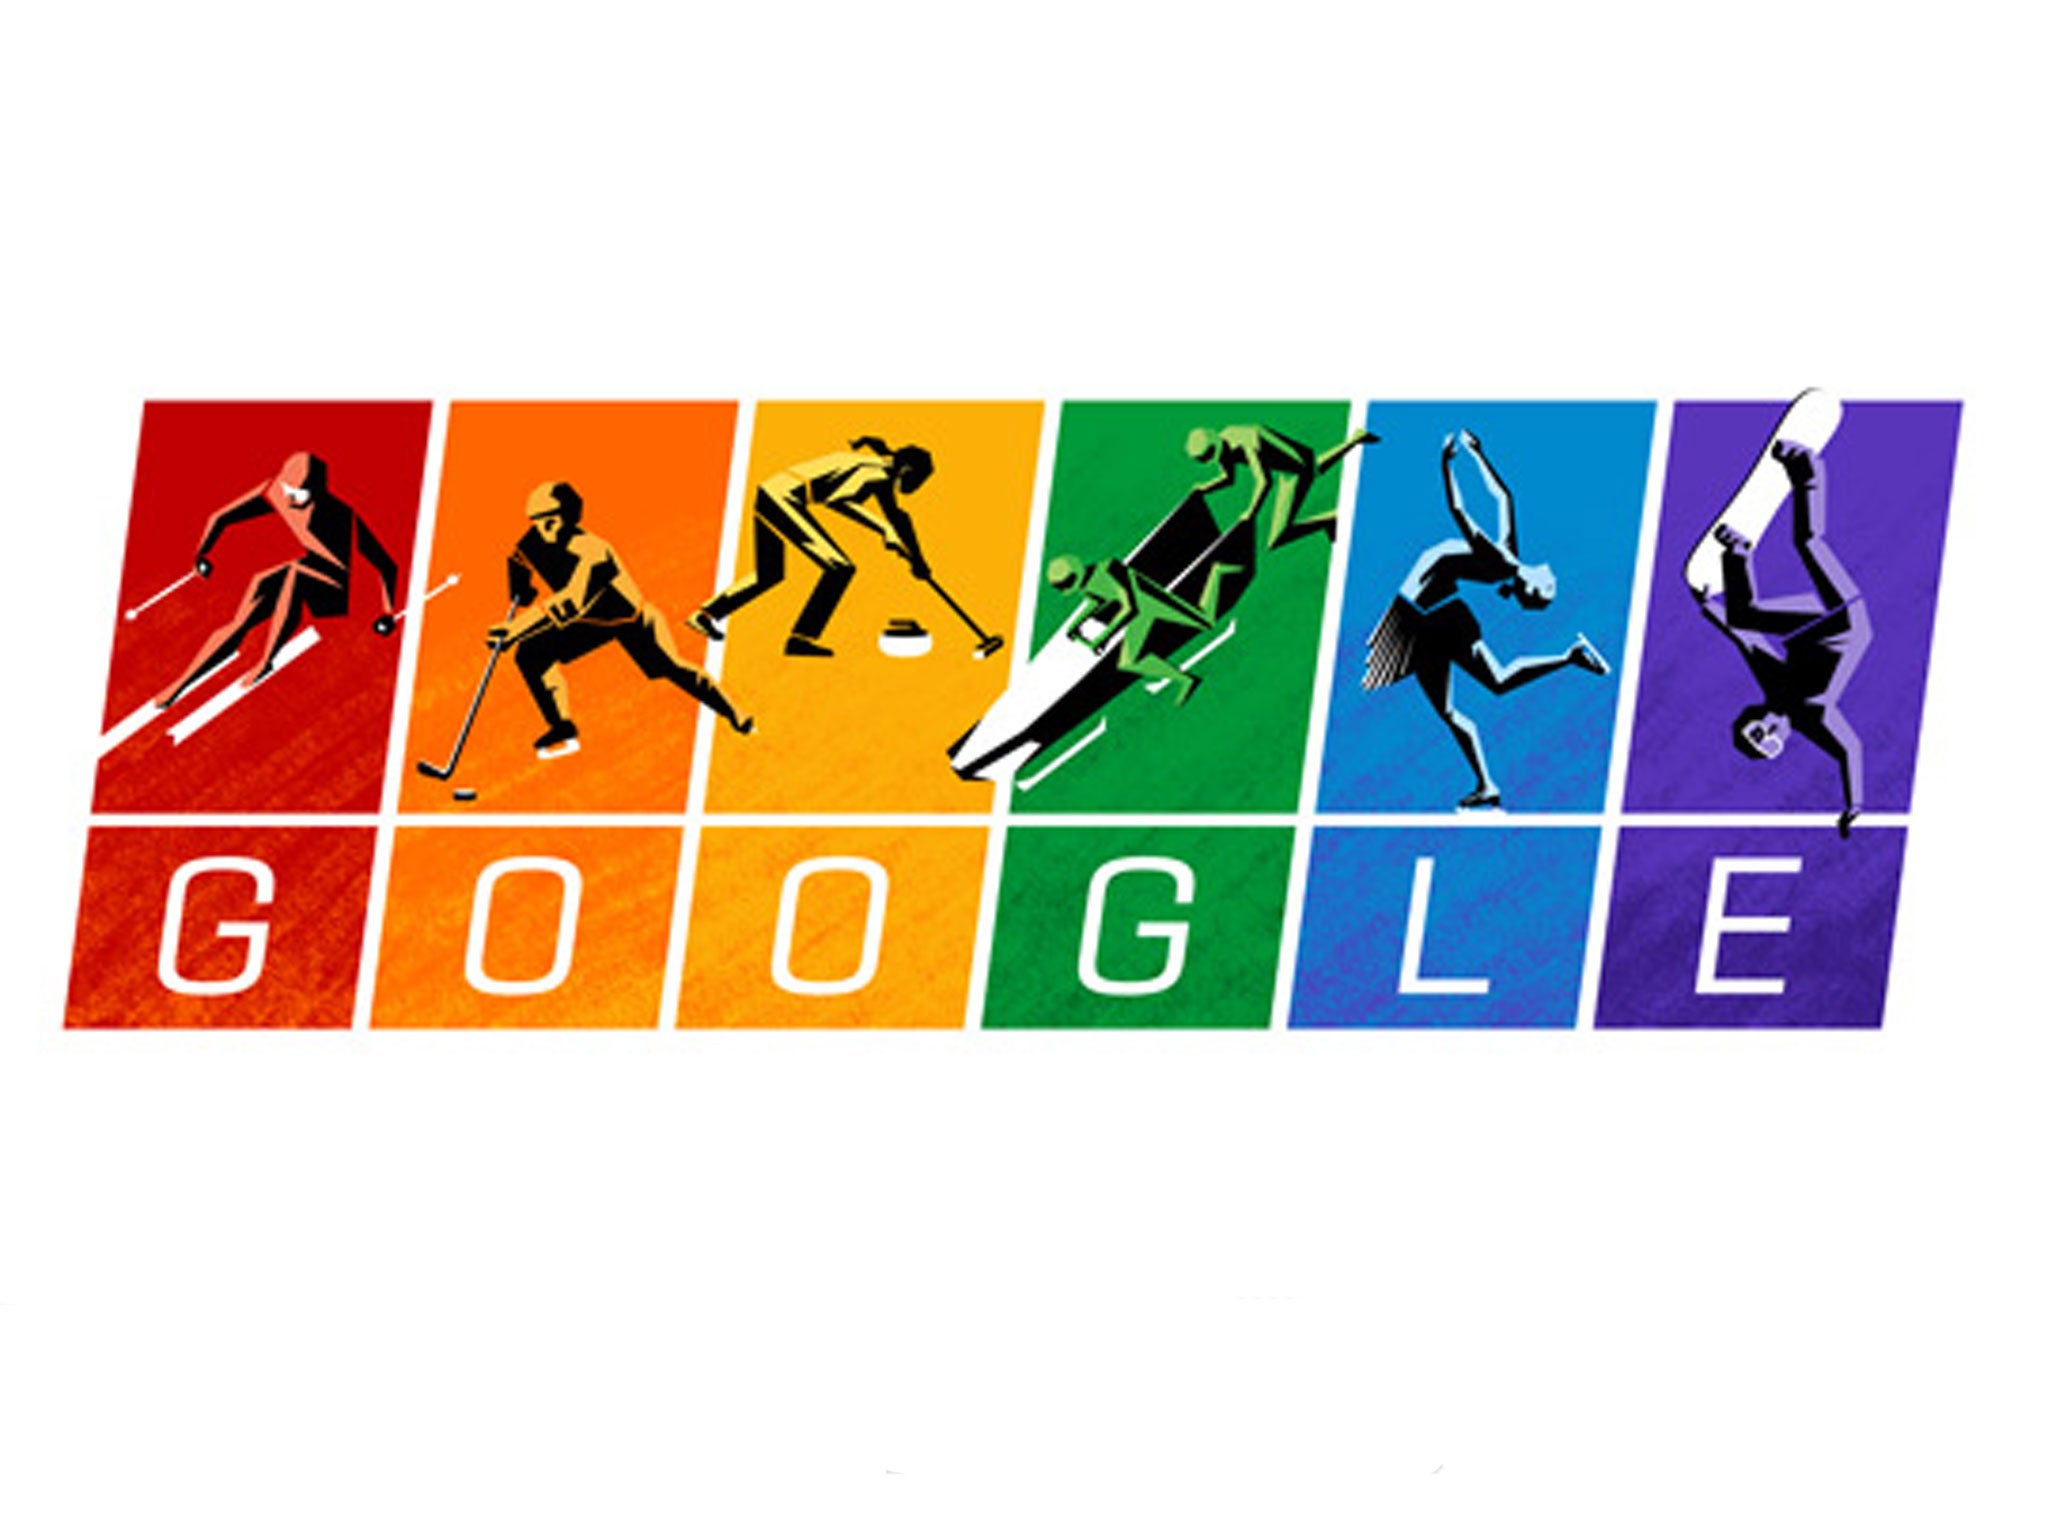 Today's Google Doodle celebrates the start of the 2014 Sochi Winter Olympics